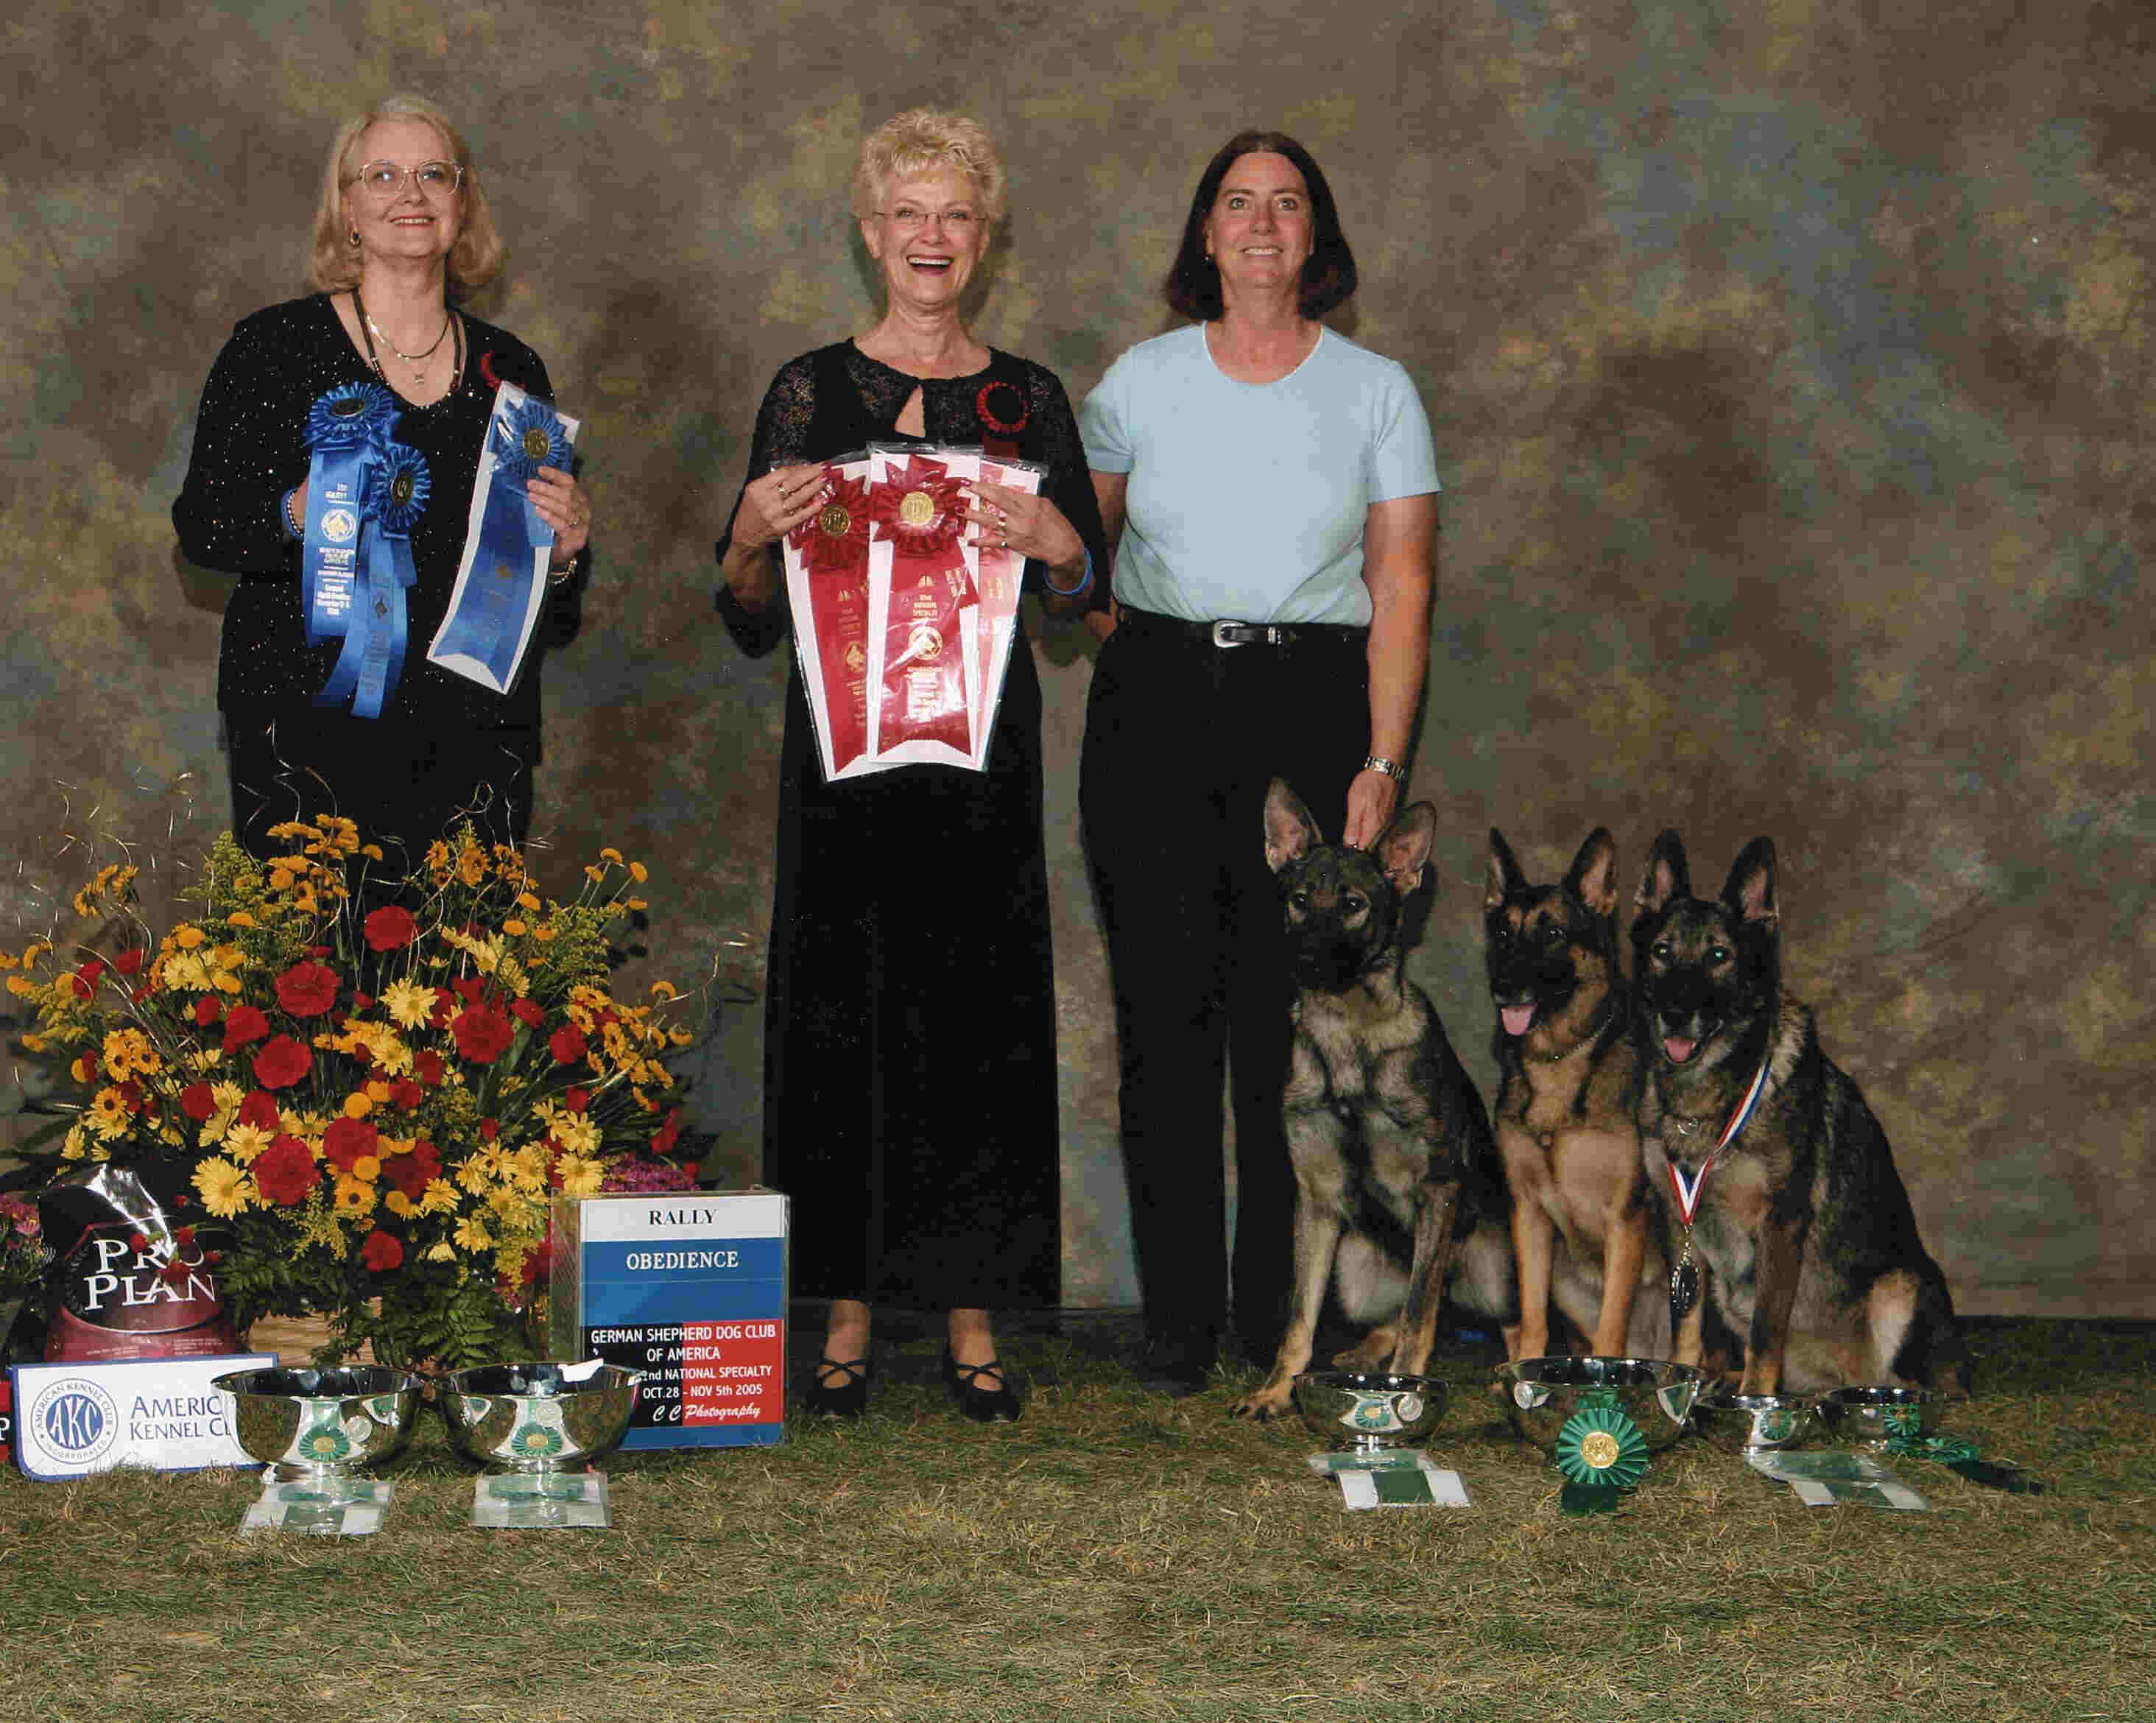 2005 Kath Cook with Feeby vom Mika-Ashmead, Gidget vom Mika-Ashmead, and Bella vom Highland Haus